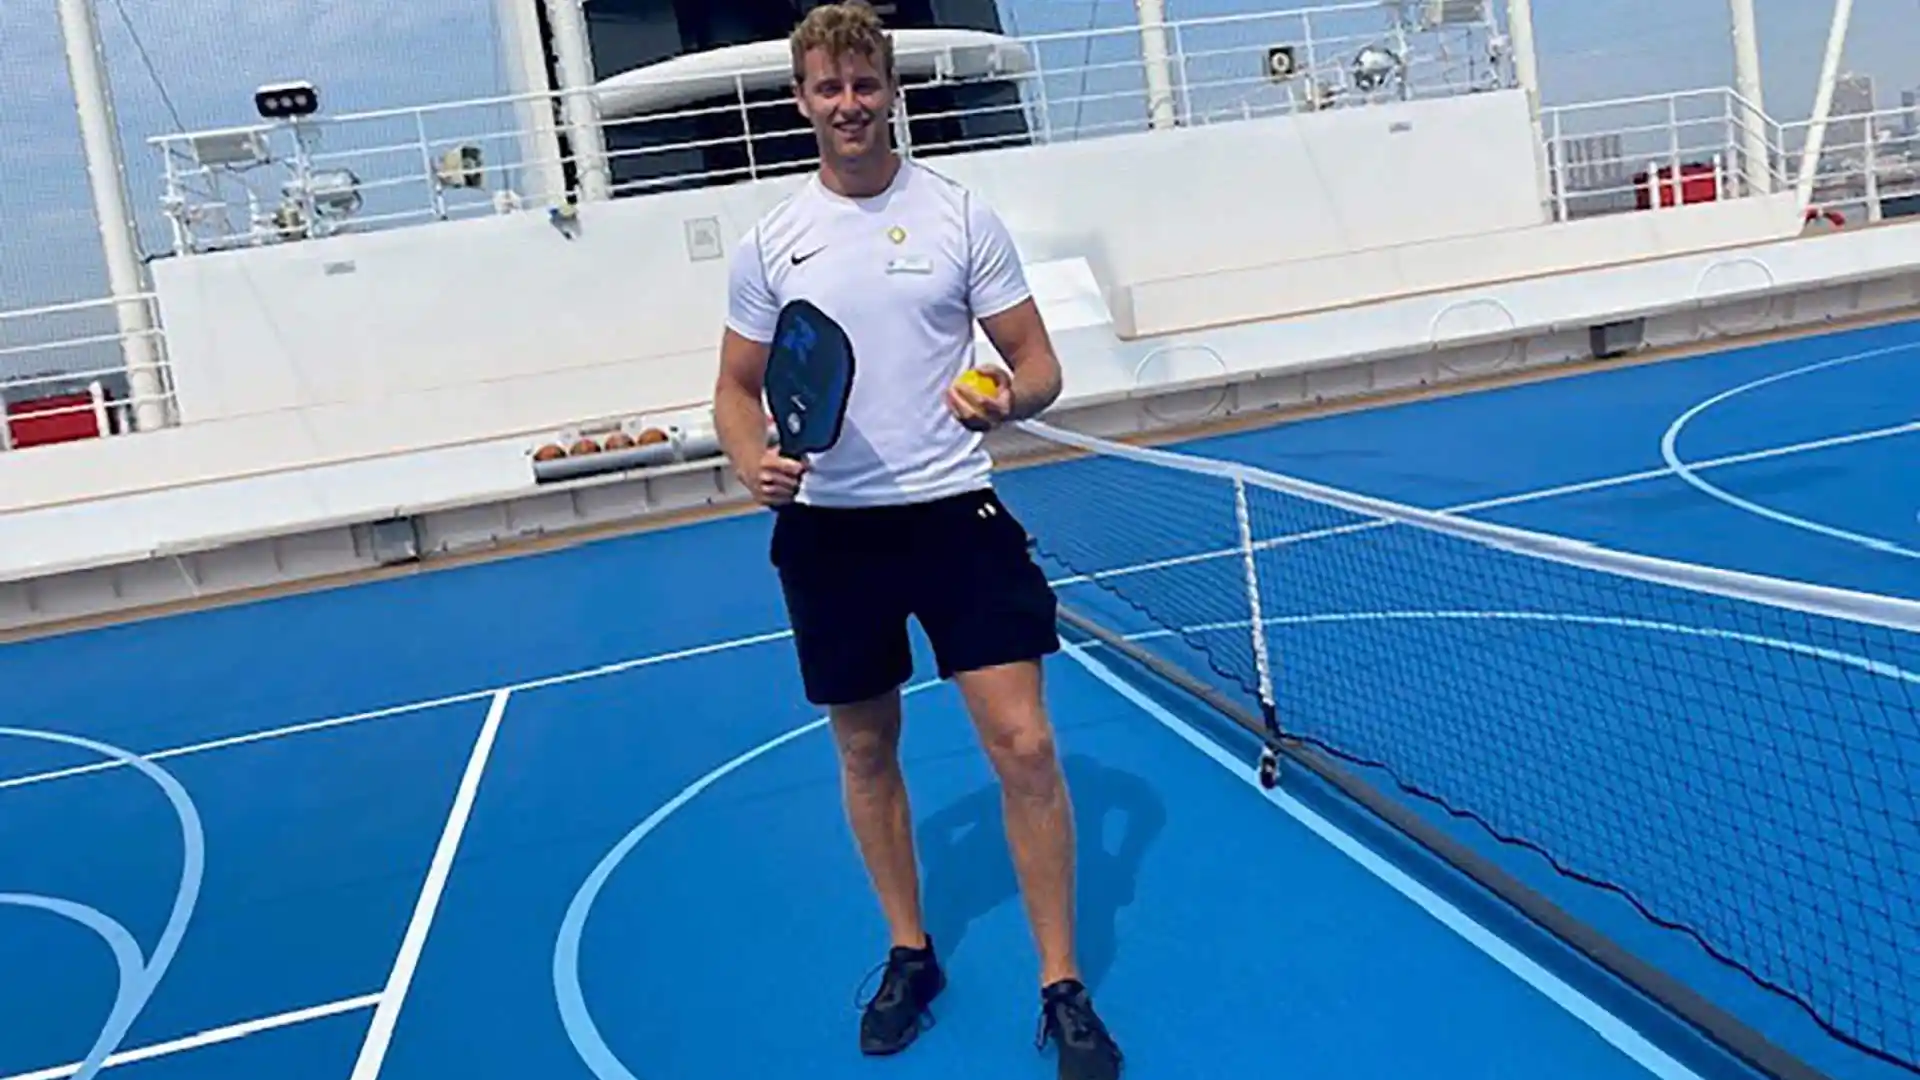 Person holding pickleball paddle and serving ball on court on Holland America Line cruise ship.